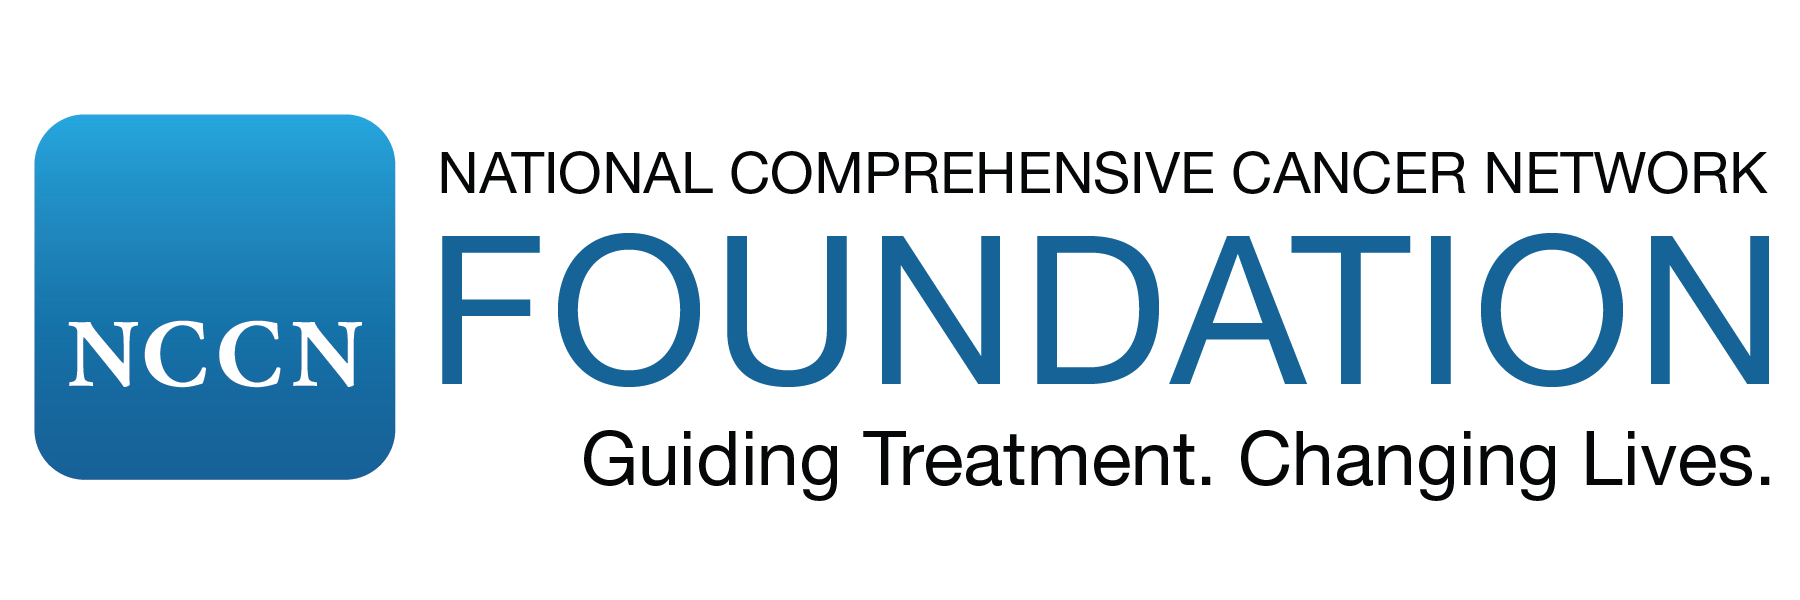 NCCN Guidelines for GIST for Patients The Life Raft Group